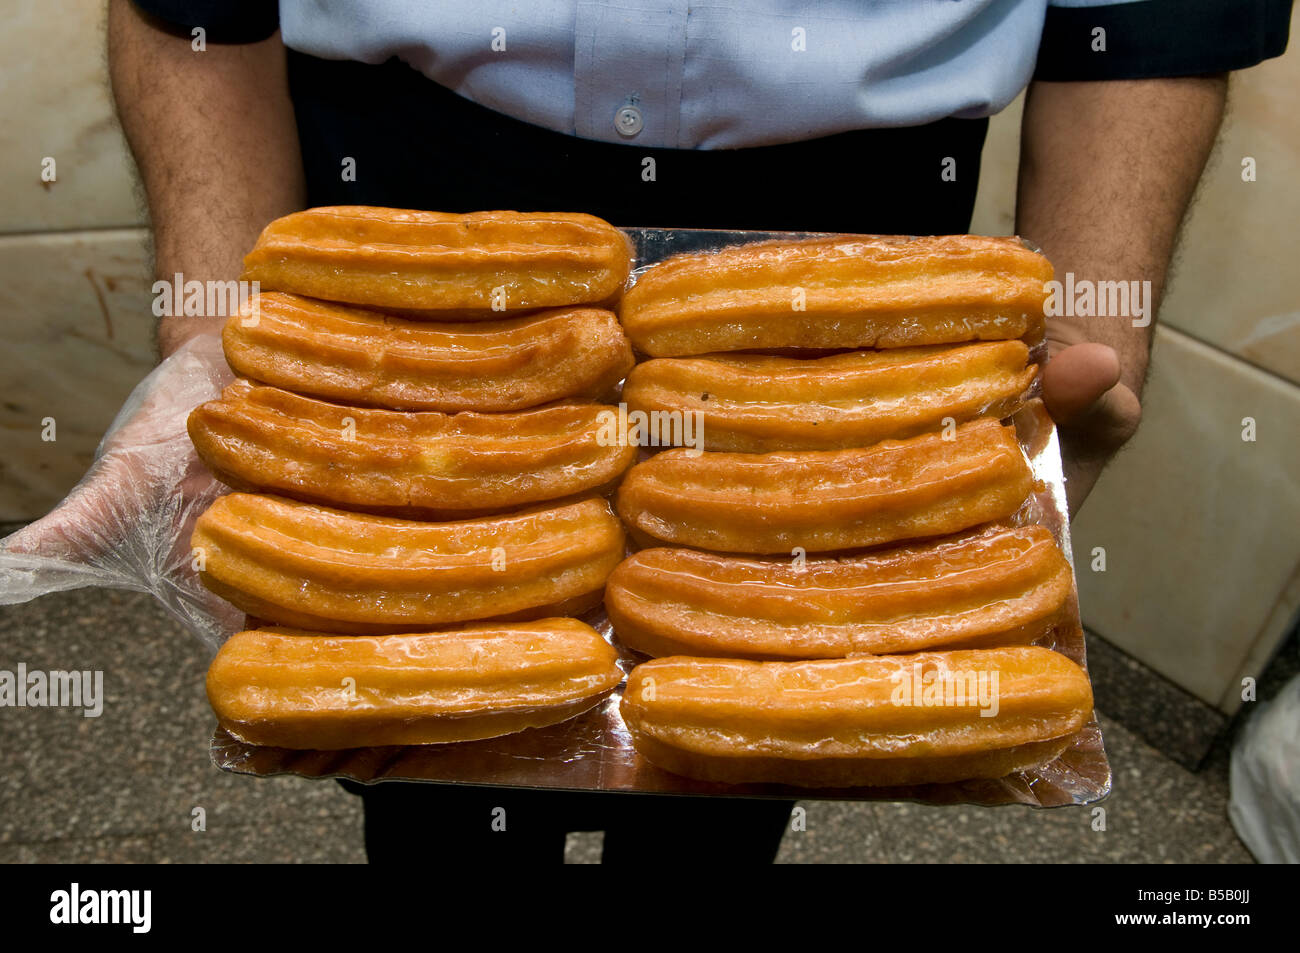 Pile of sweet delight Tulumba or Bamiyeh deep-fried batter dough soaked in simple syrup found in Ottoman cuisine called in Egypt balah ash-sham Stock Photo